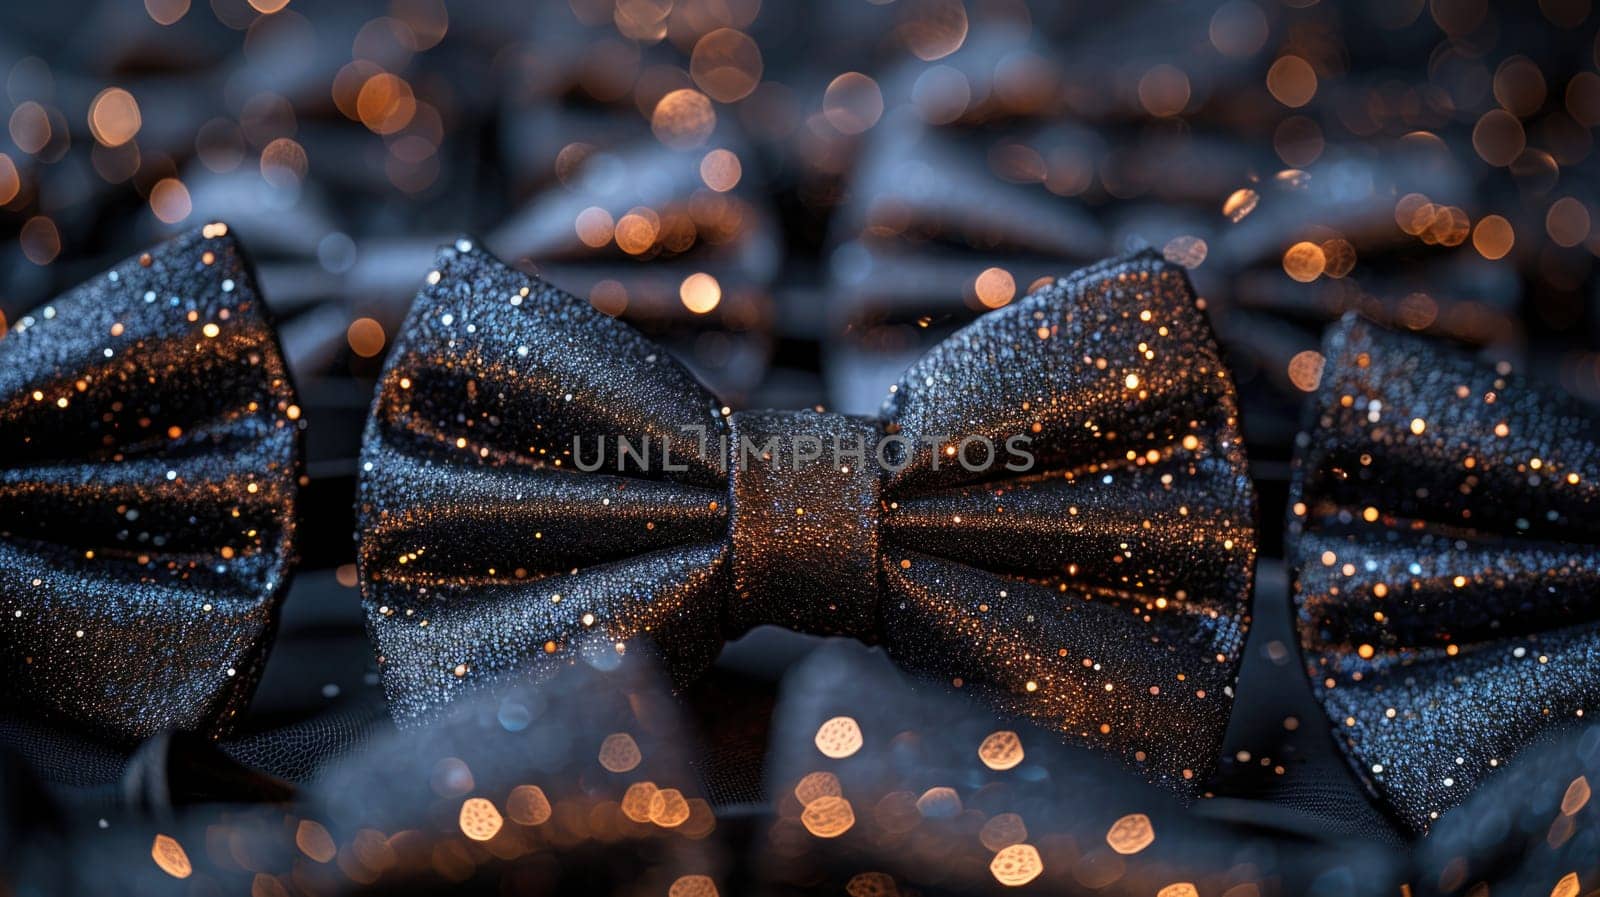 A detailed shot of a sleek black bow tie, showcasing its intricate design and texture.